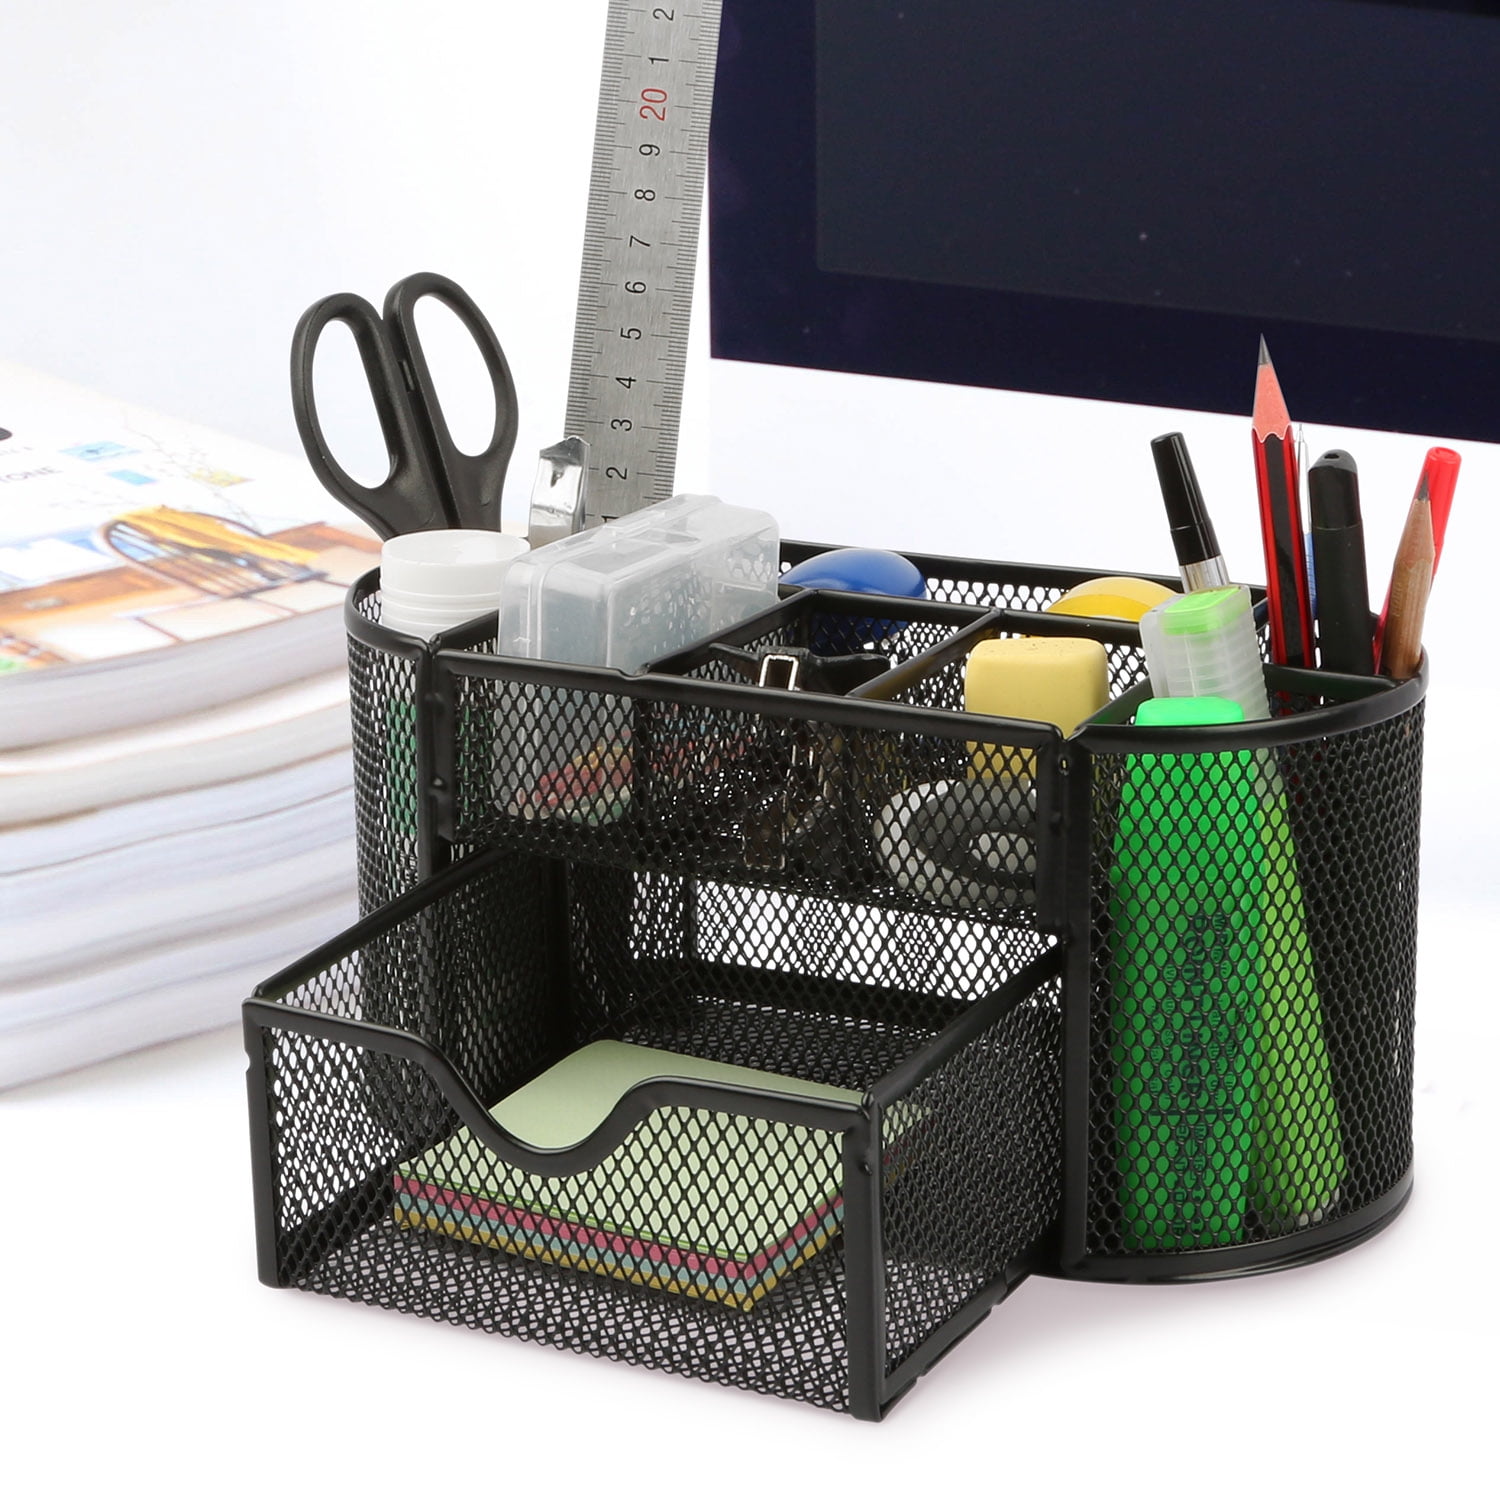 Small Desk Supplies Organizer Caddy Pen Pencil Rack Home Table Office Black for sale online 